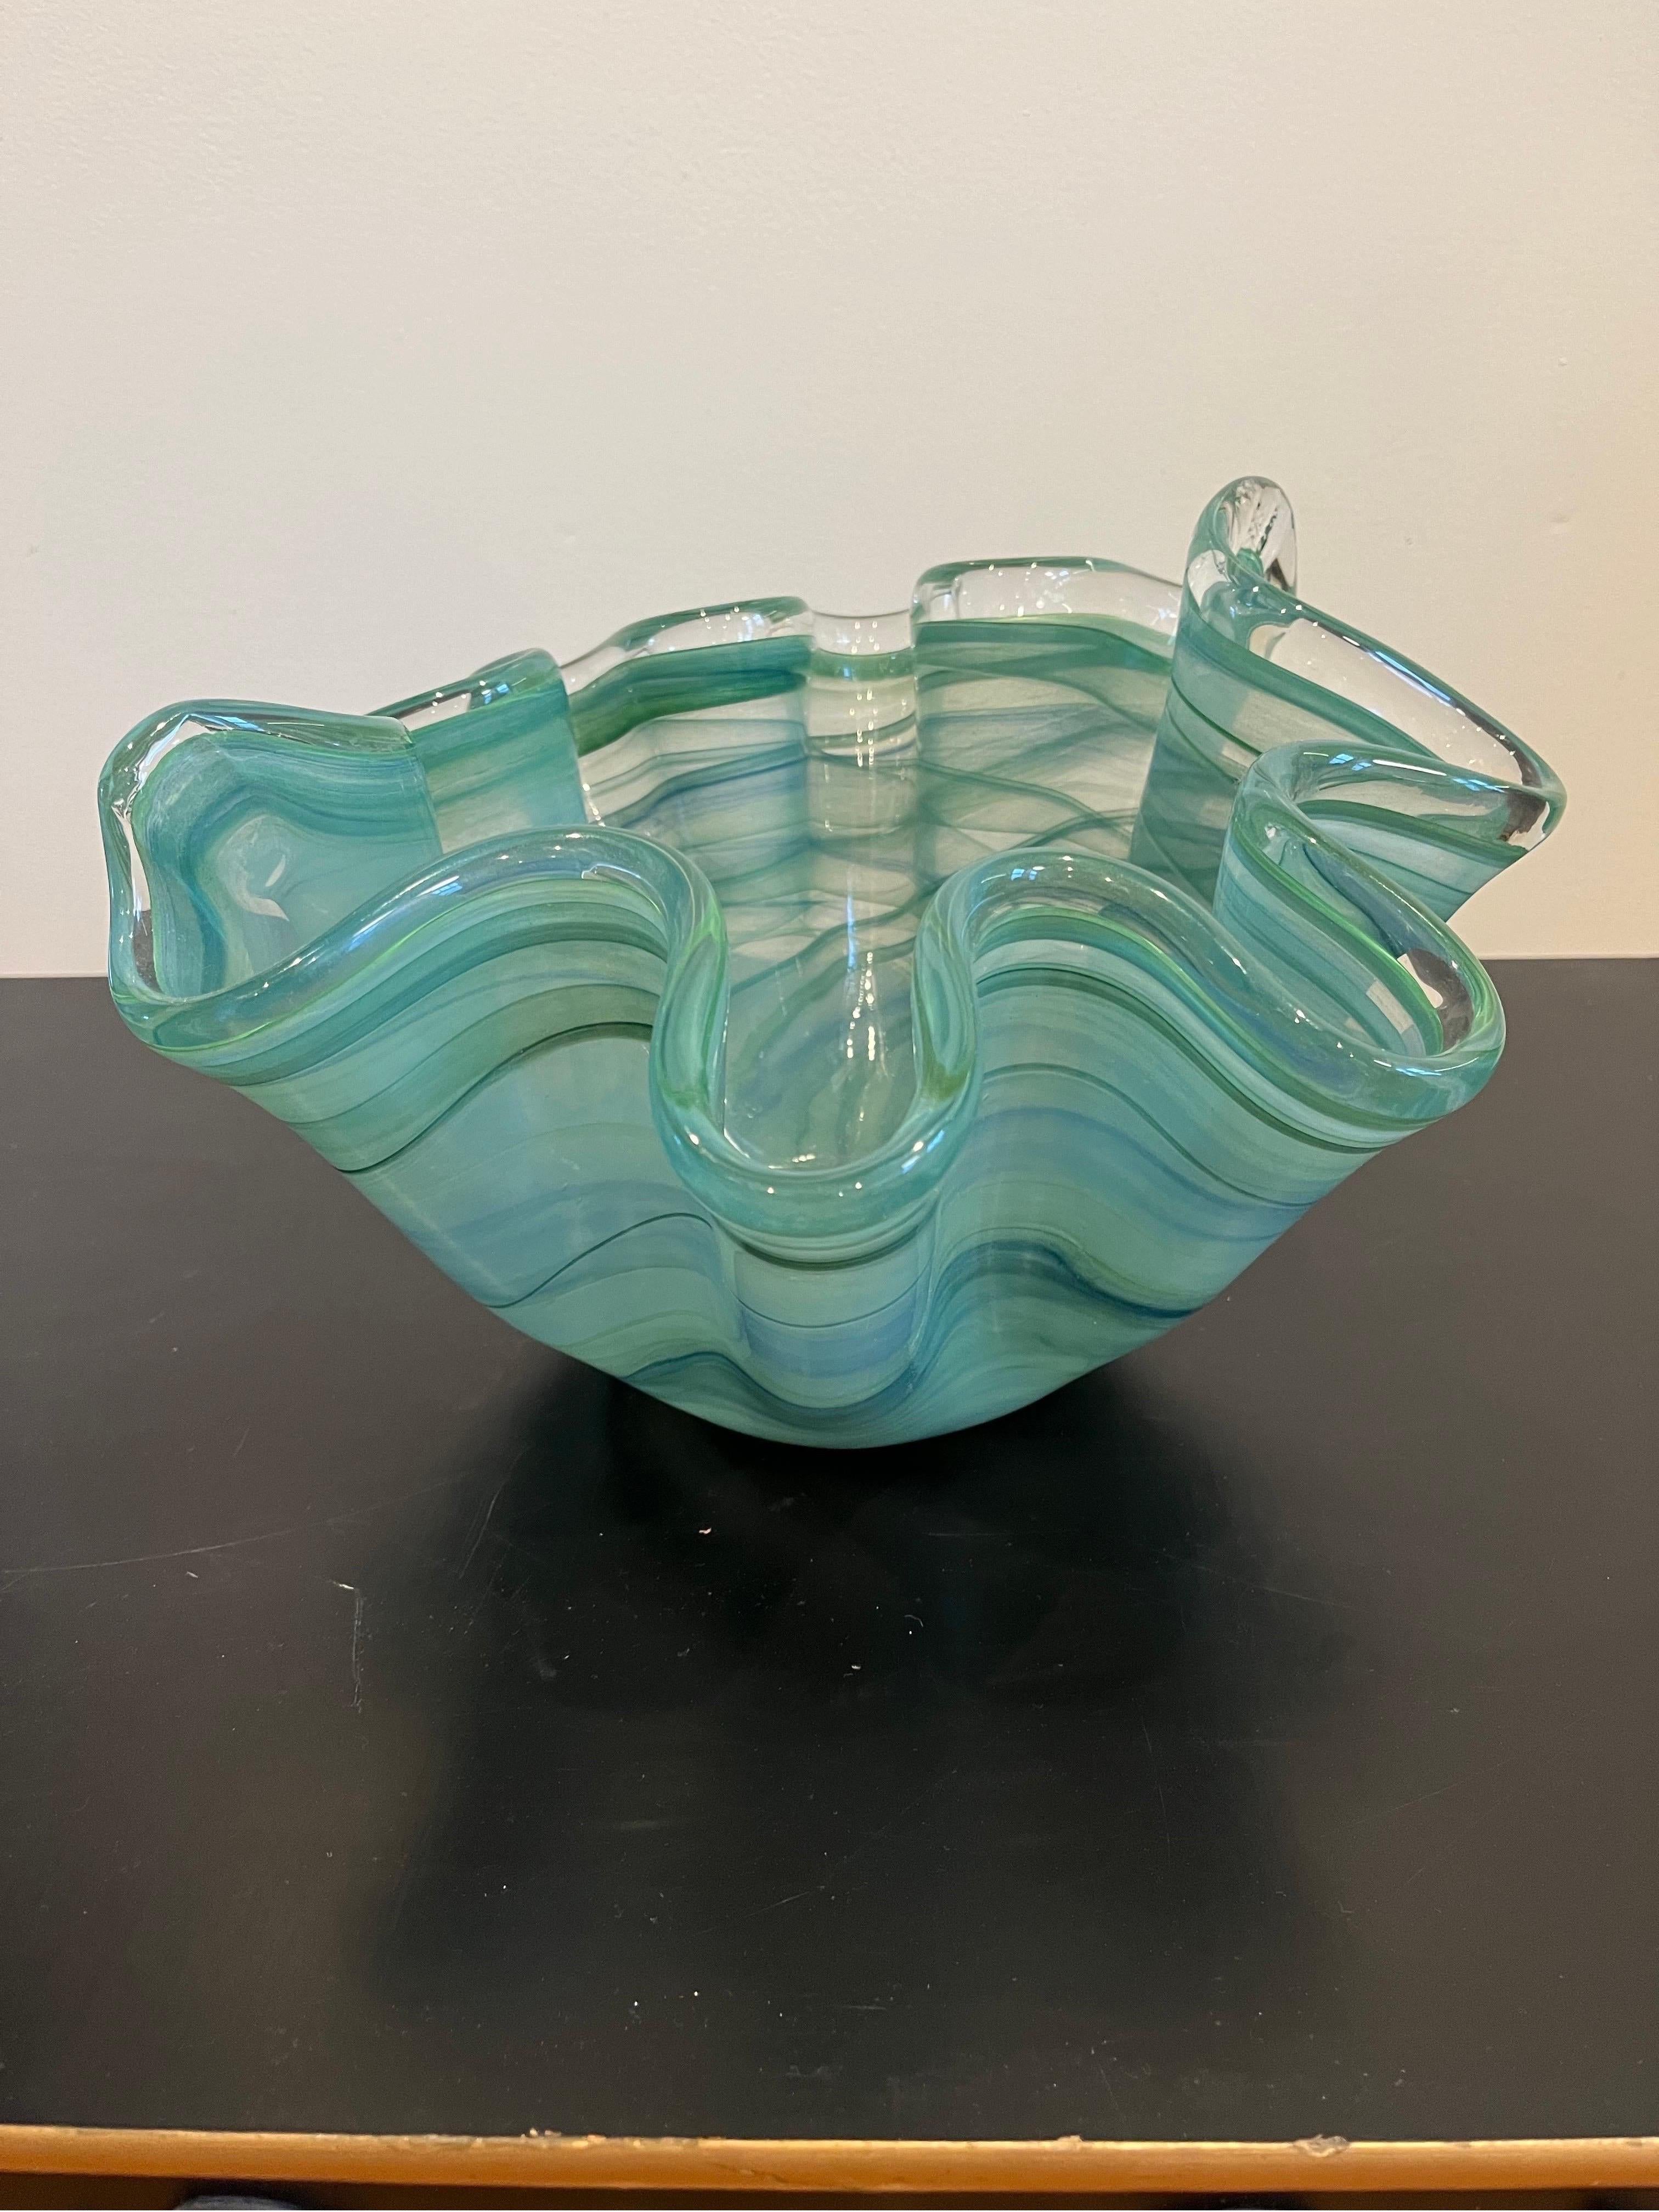 Beautiful Murano hand blown Italian art glass handkerchief vase with some small air bubbles in the glass. Dreamy green and white. Measures: 13